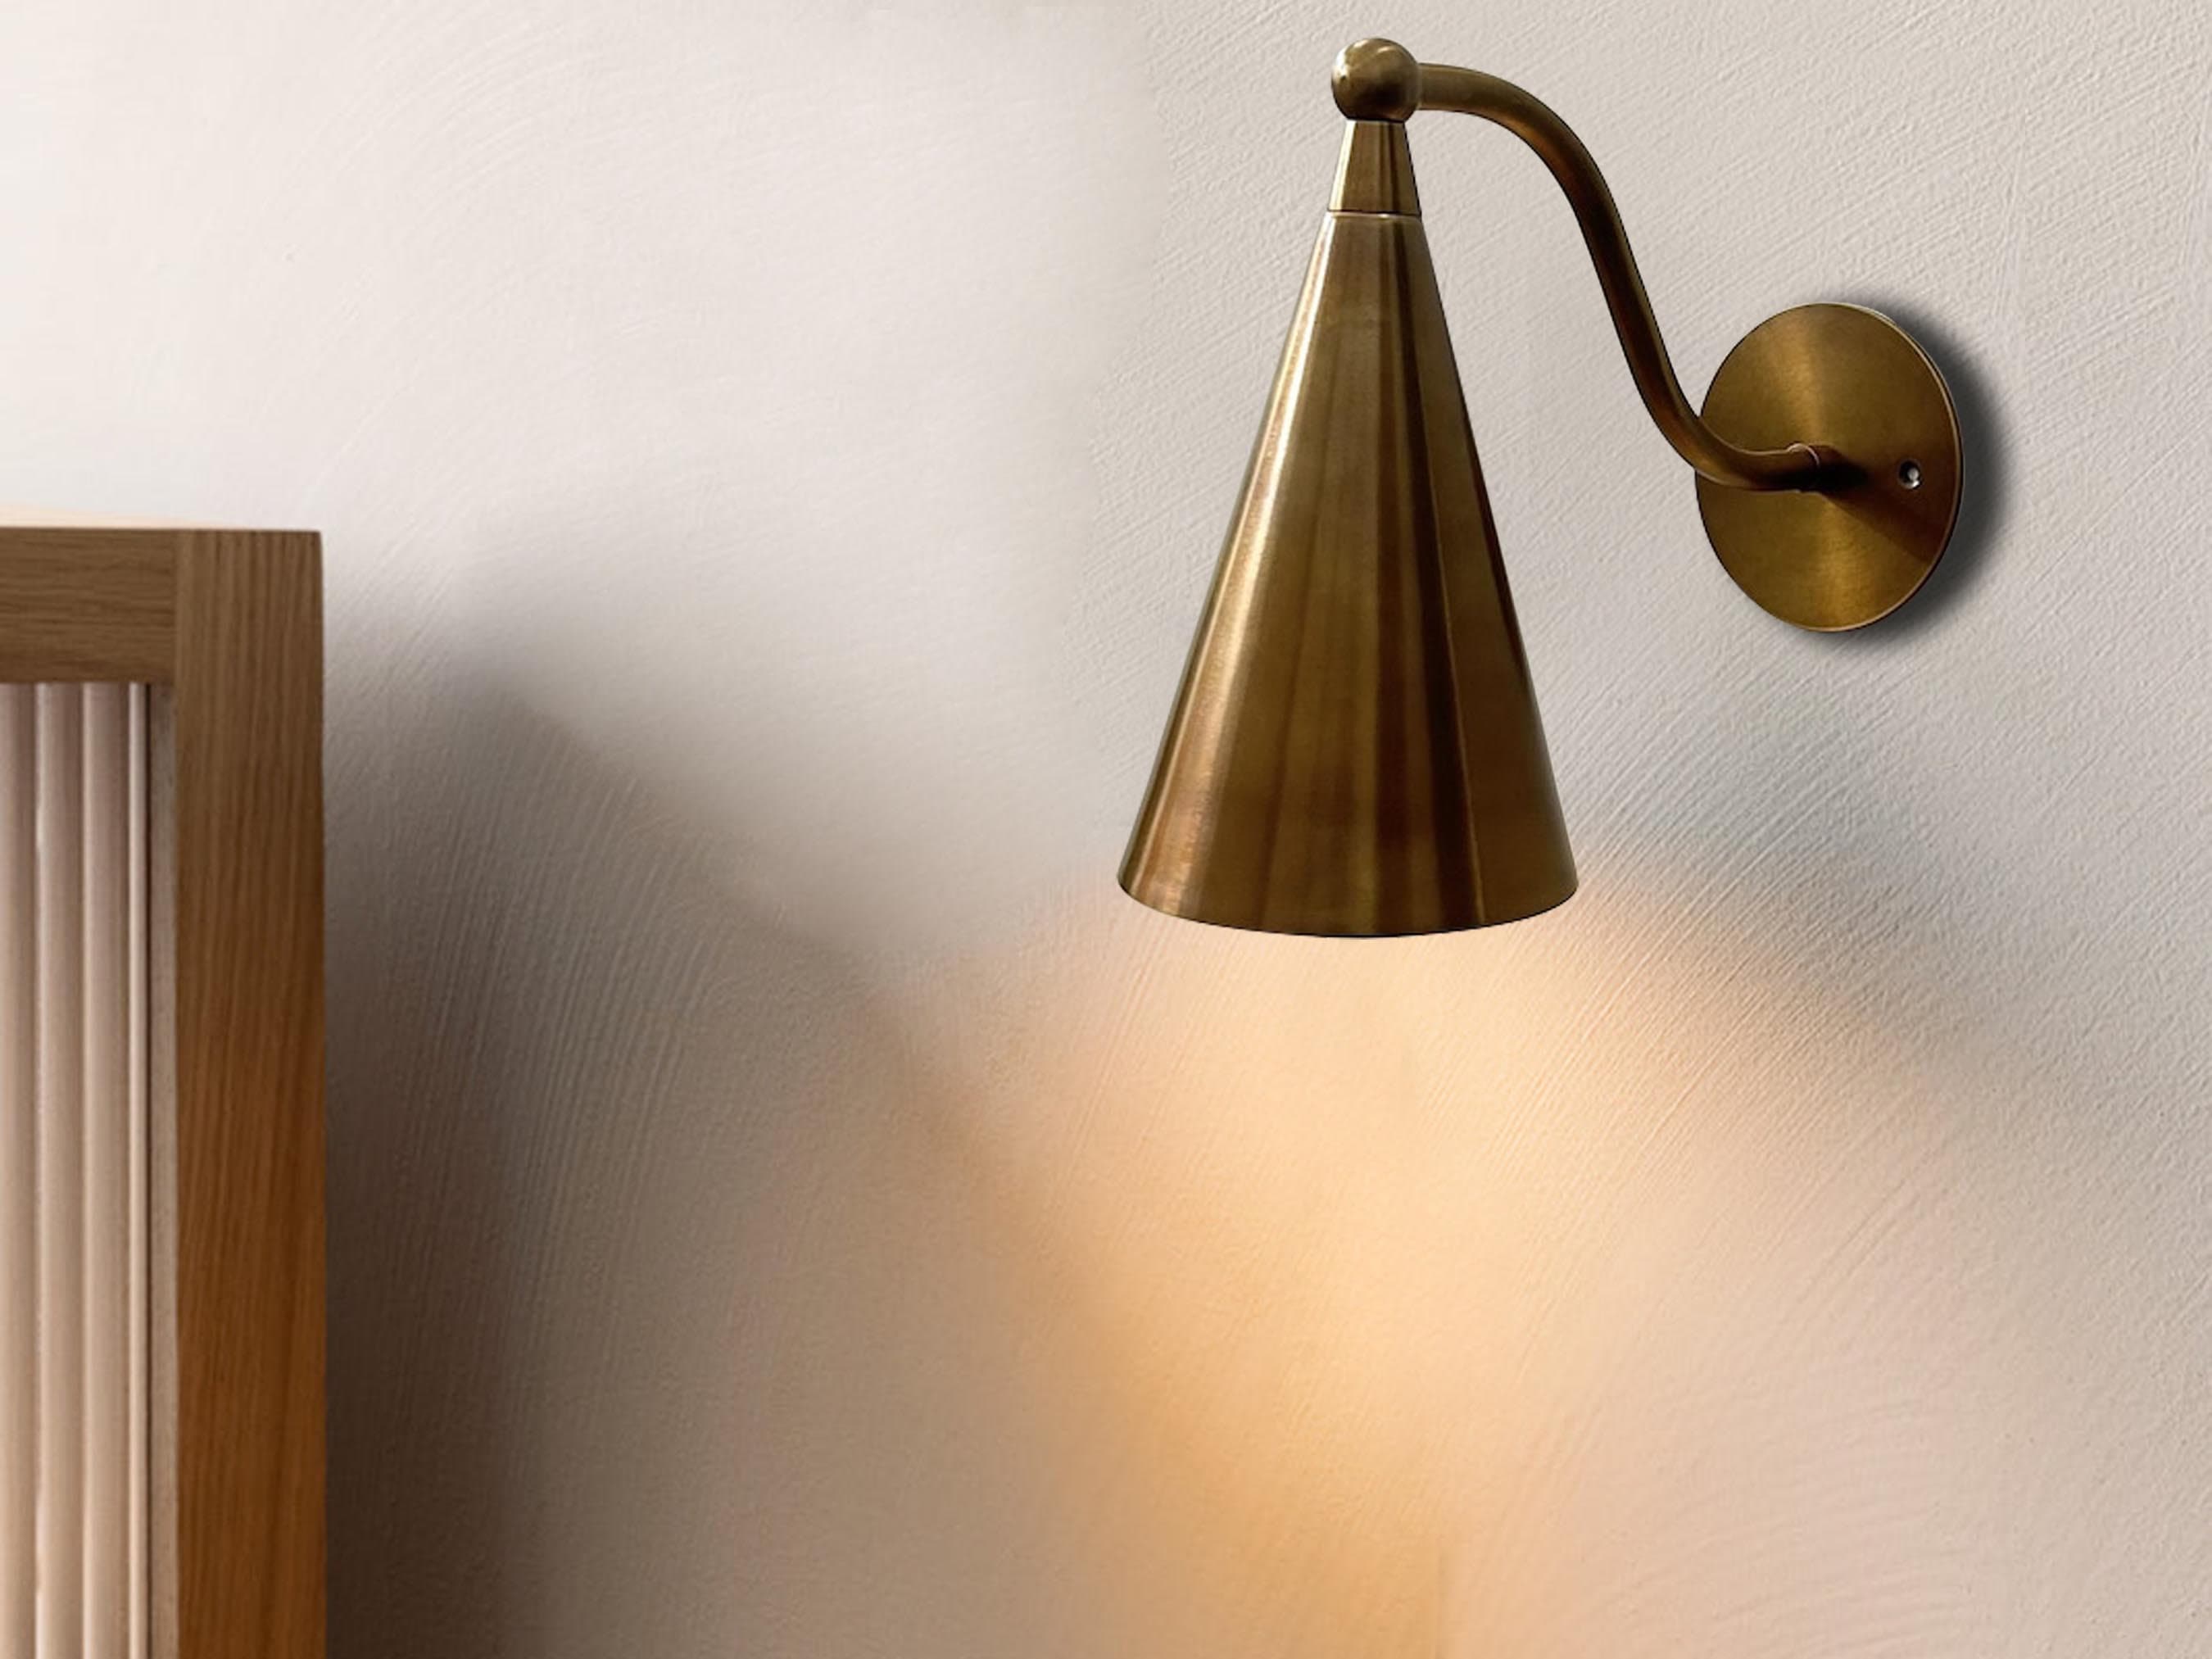 PAIR OF ITALIAN BRASS ARTICULATED WALL LIGHTS BY ALBINI & HELG c